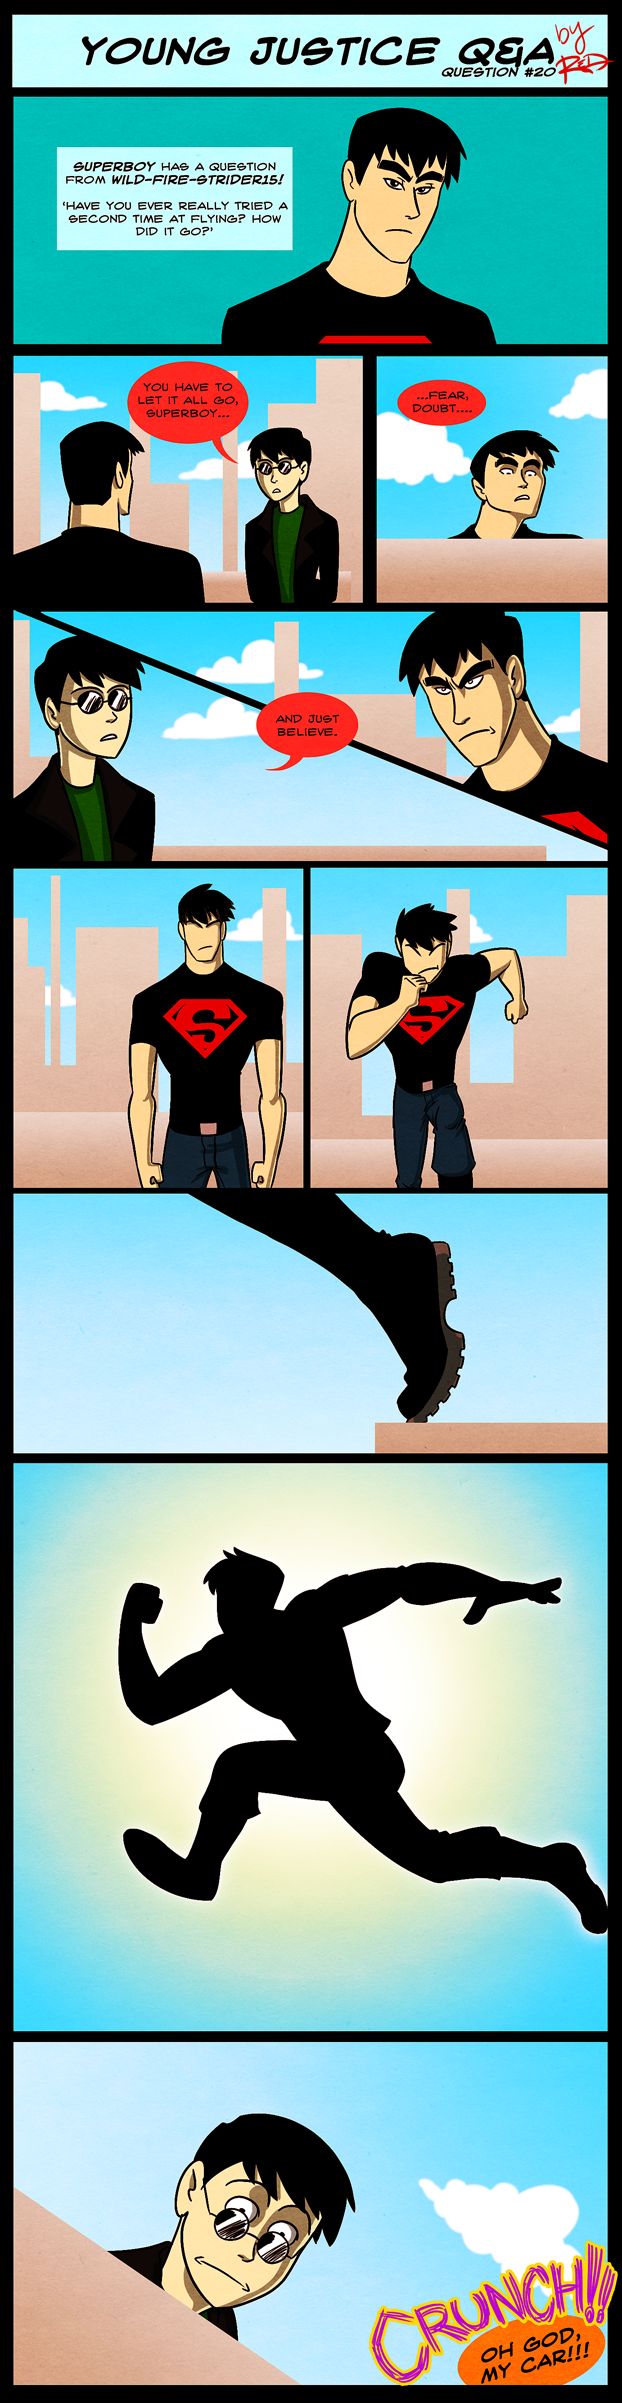 ali salman salman recommends nightwing young justice fanfiction pic